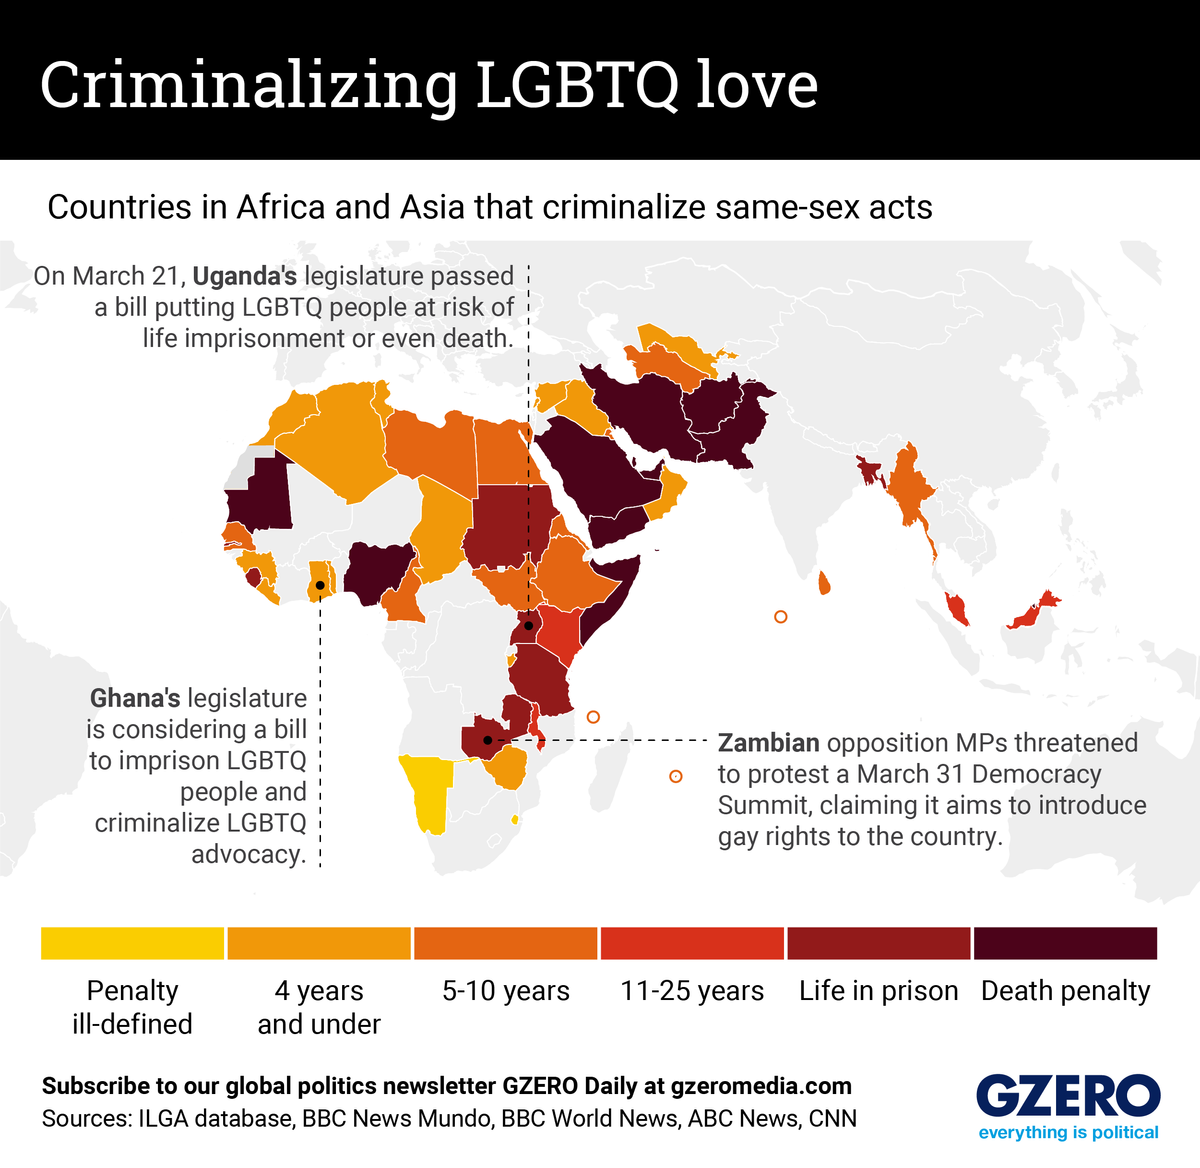 A map showing countries in Africa and Asia that criminalize same-sex acts, by degree of punishment.